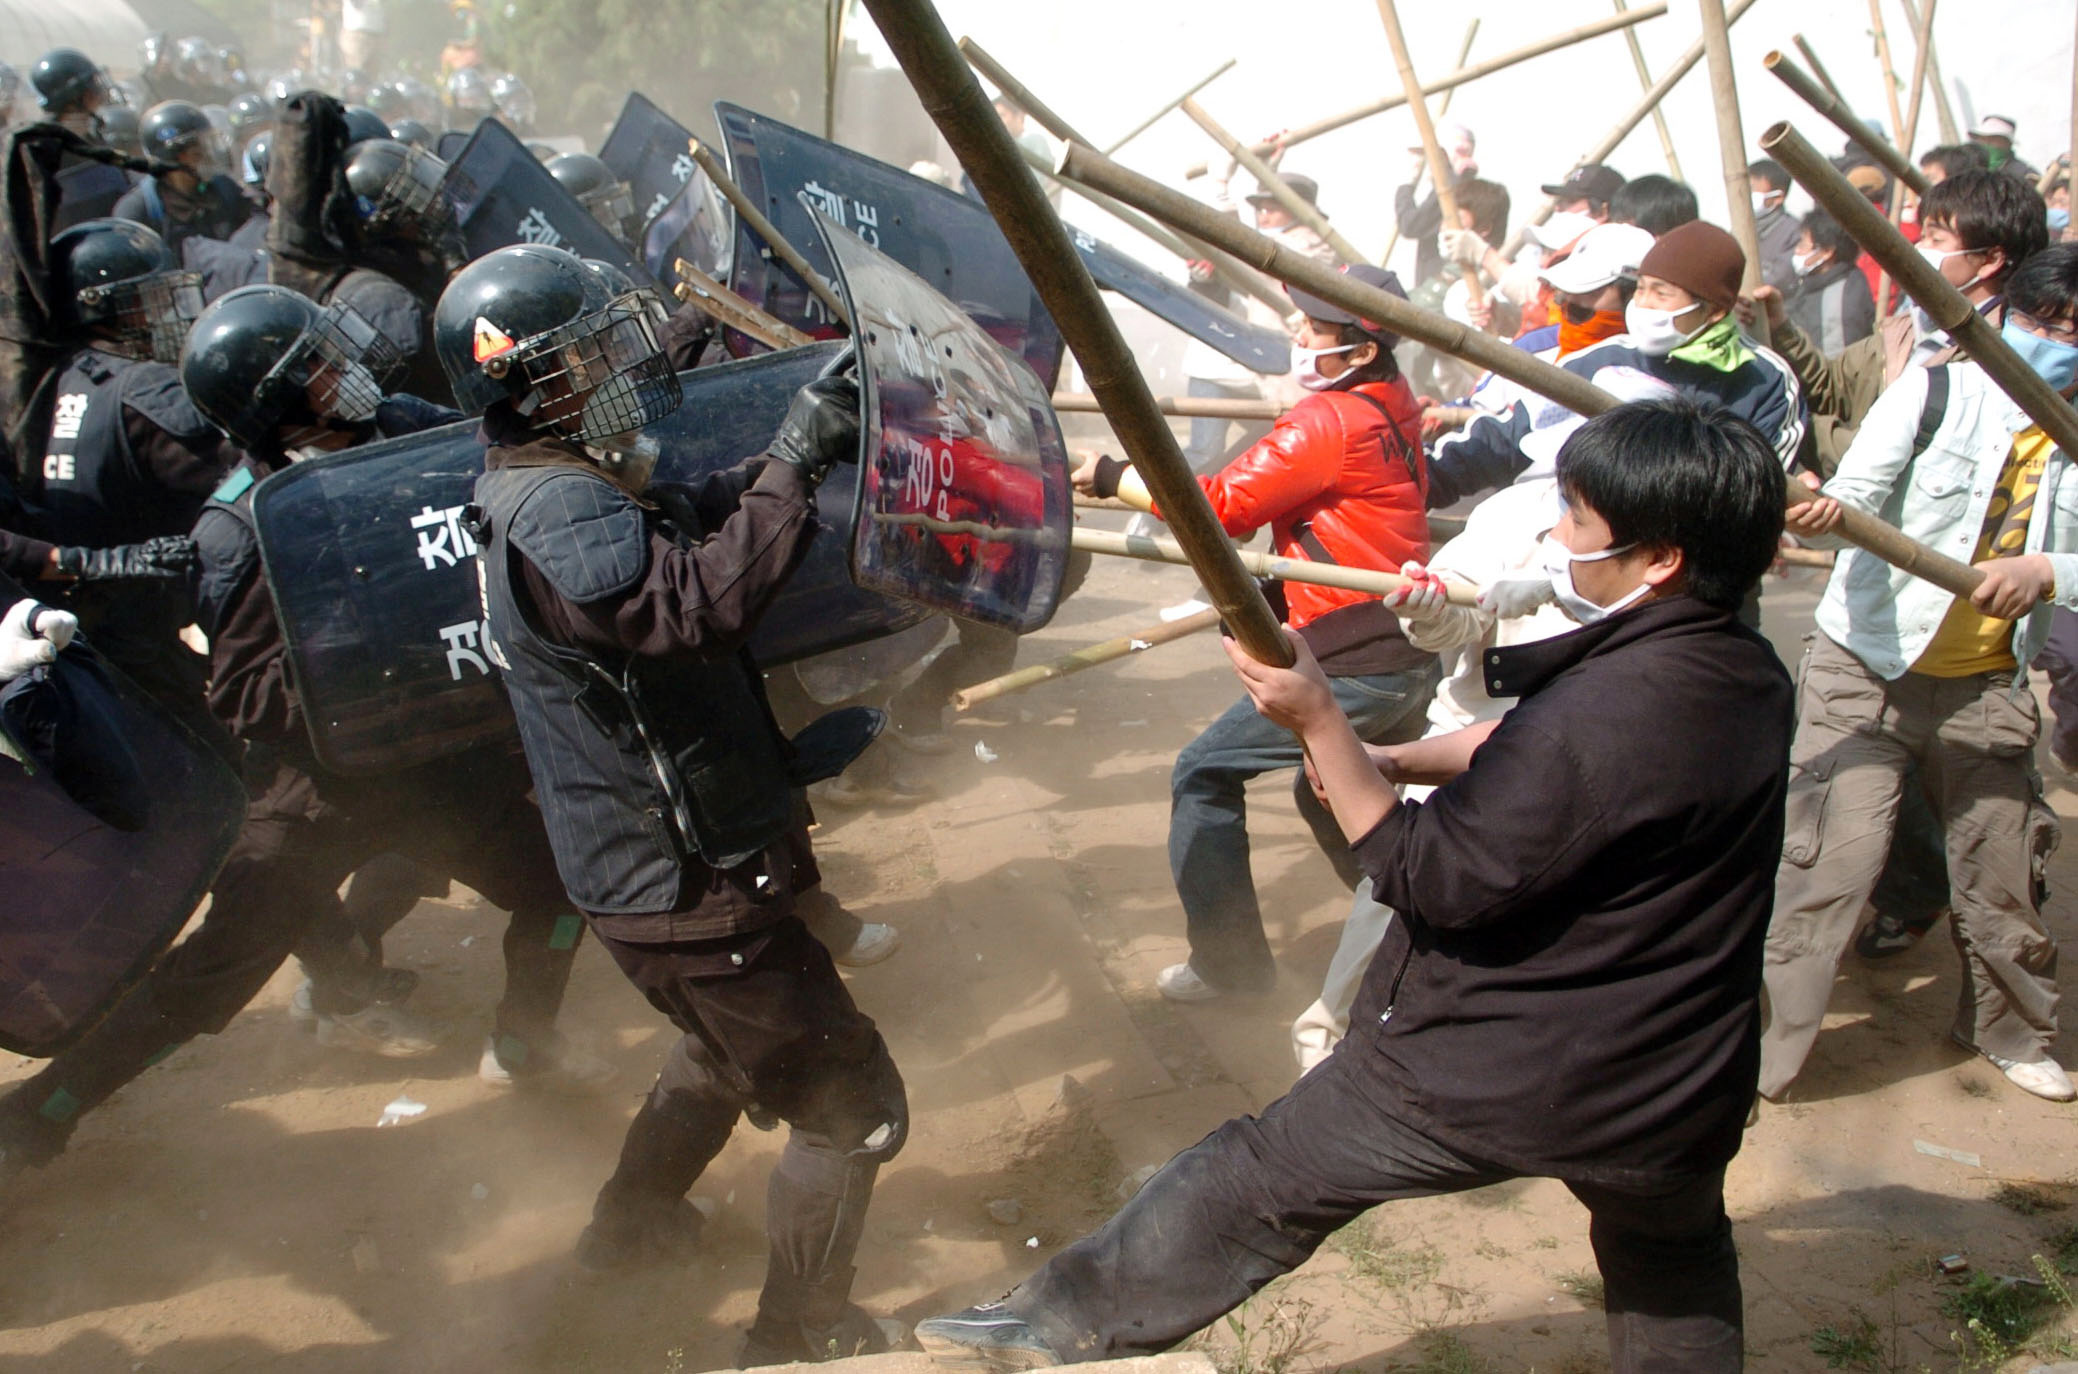 South Korean riot police break up a protest in Pyeongtaek, South Korea, near the U.S. military facility Camp Humphreys, on May 4, 2006. (Seokyong Lee—Bloomberg/Getty Images)